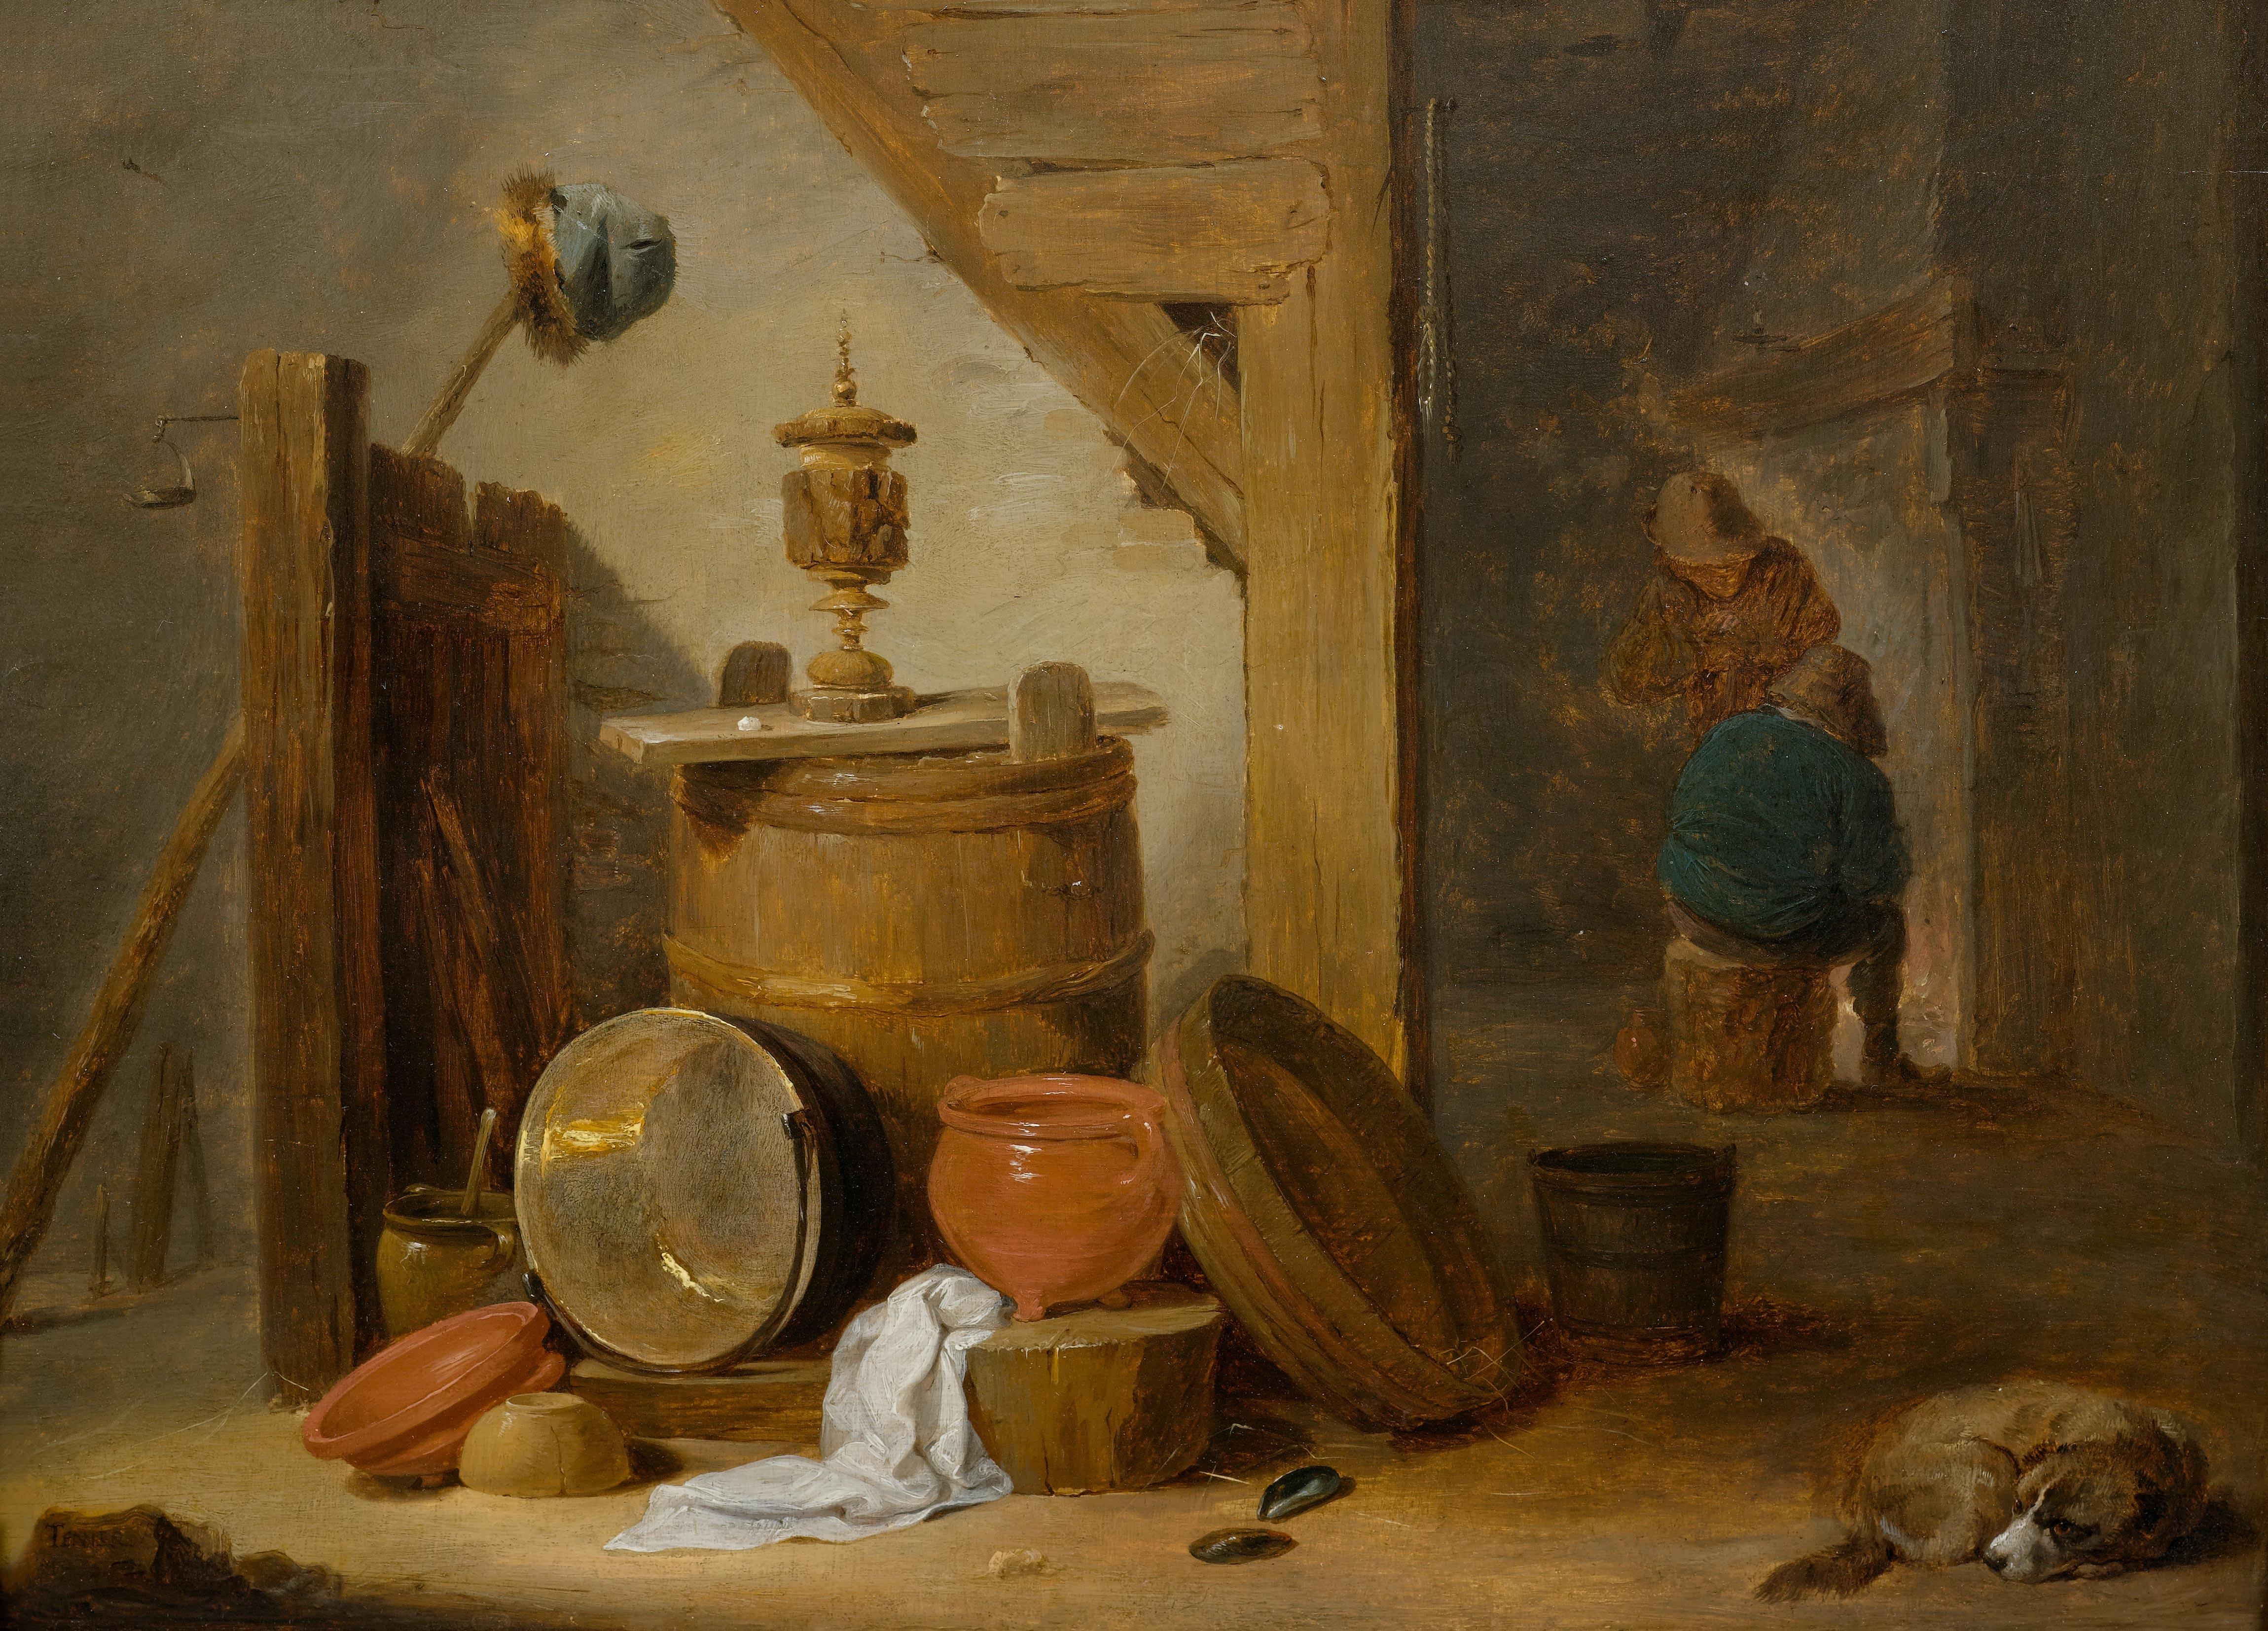 A tavern interior with a dog and kitchen utensils  - Brown Still-Life Painting by David Teniers the Younger